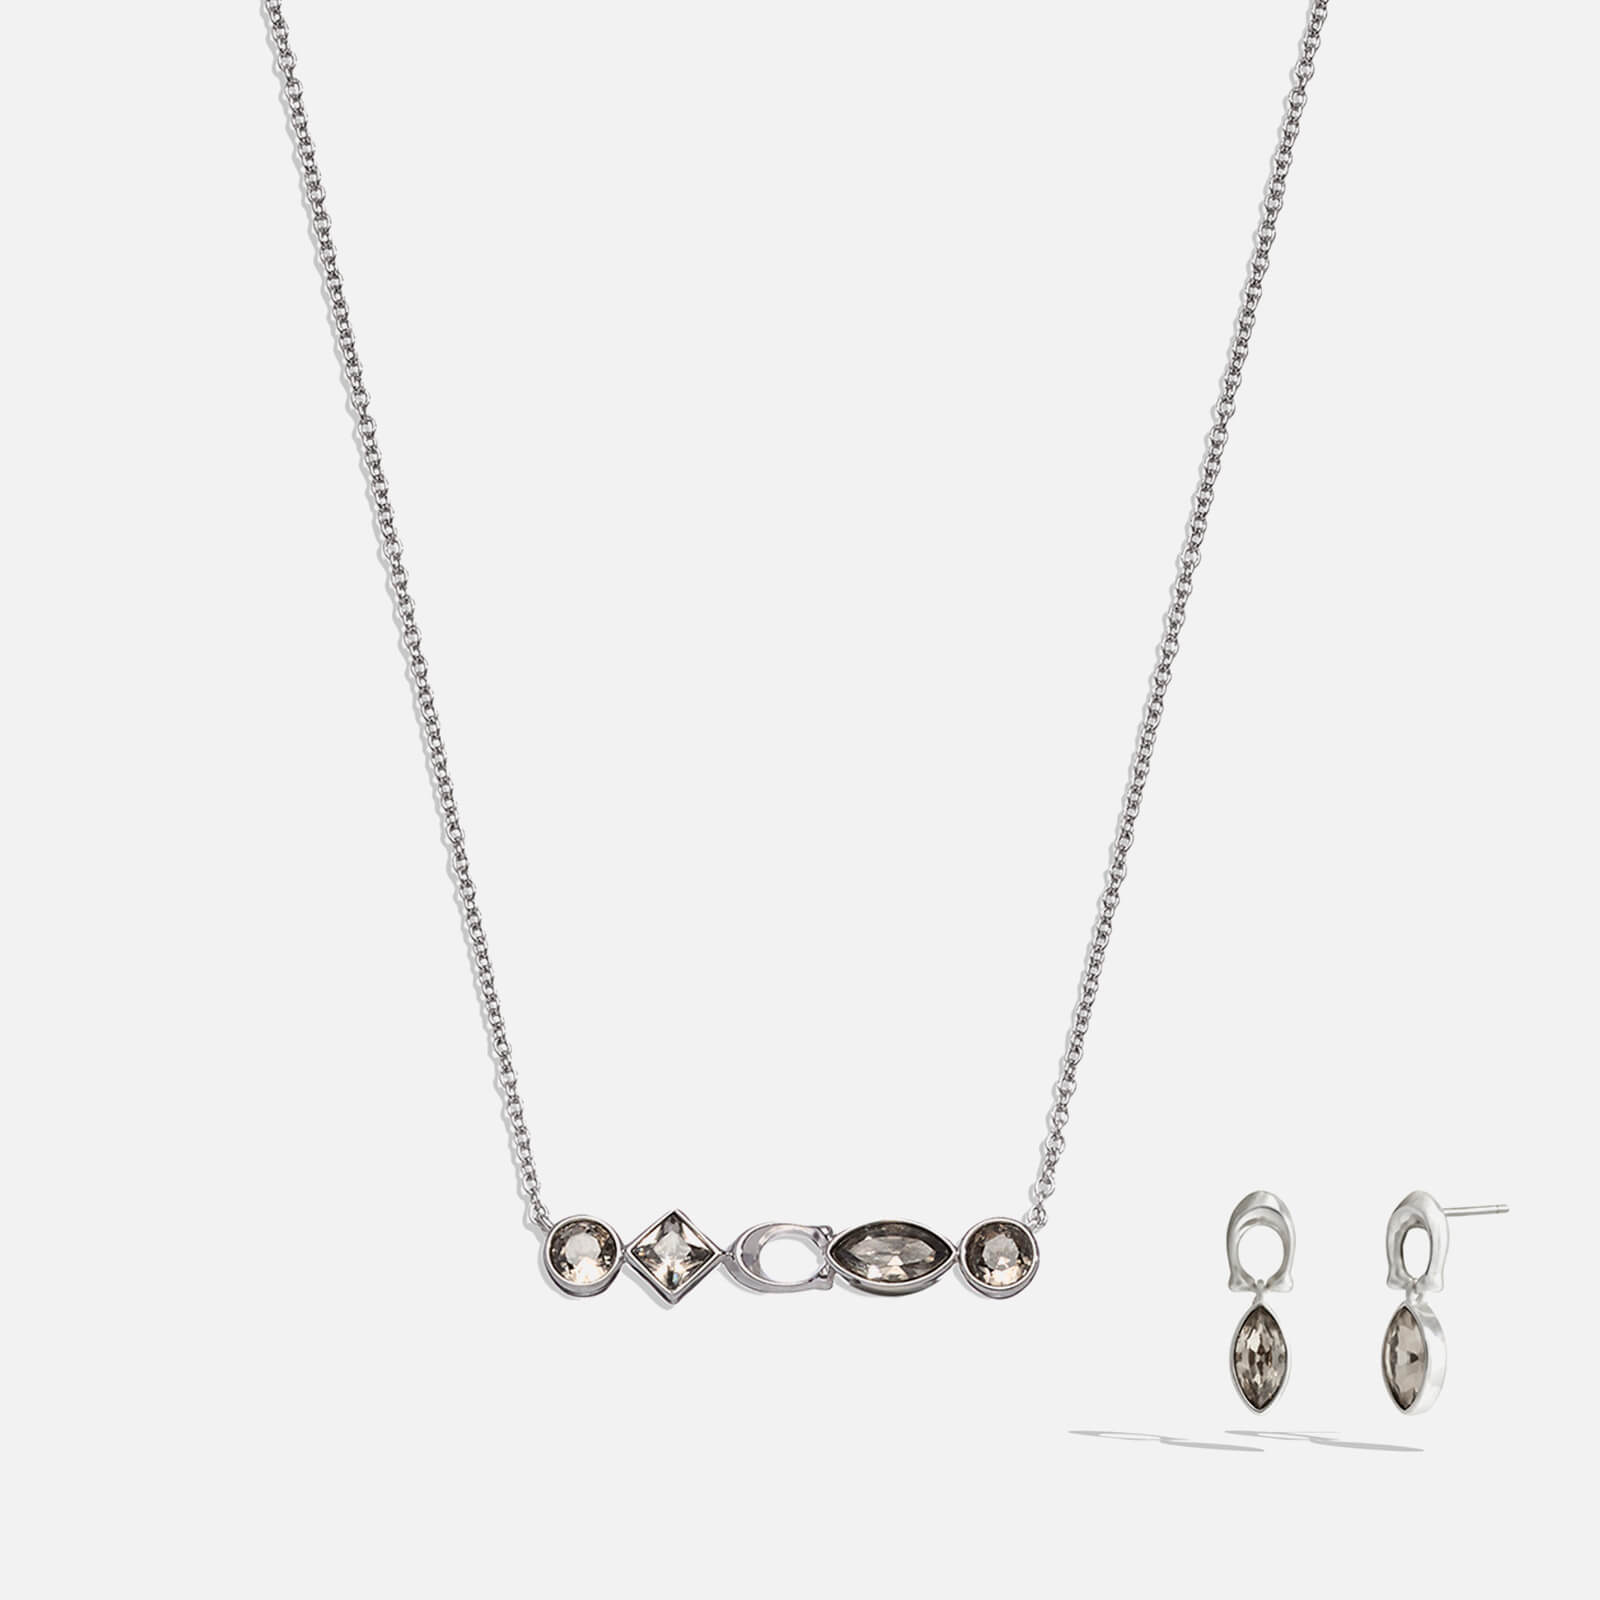 Coach Gemstone Earring And Necklace Set - Rhodium/Crystal